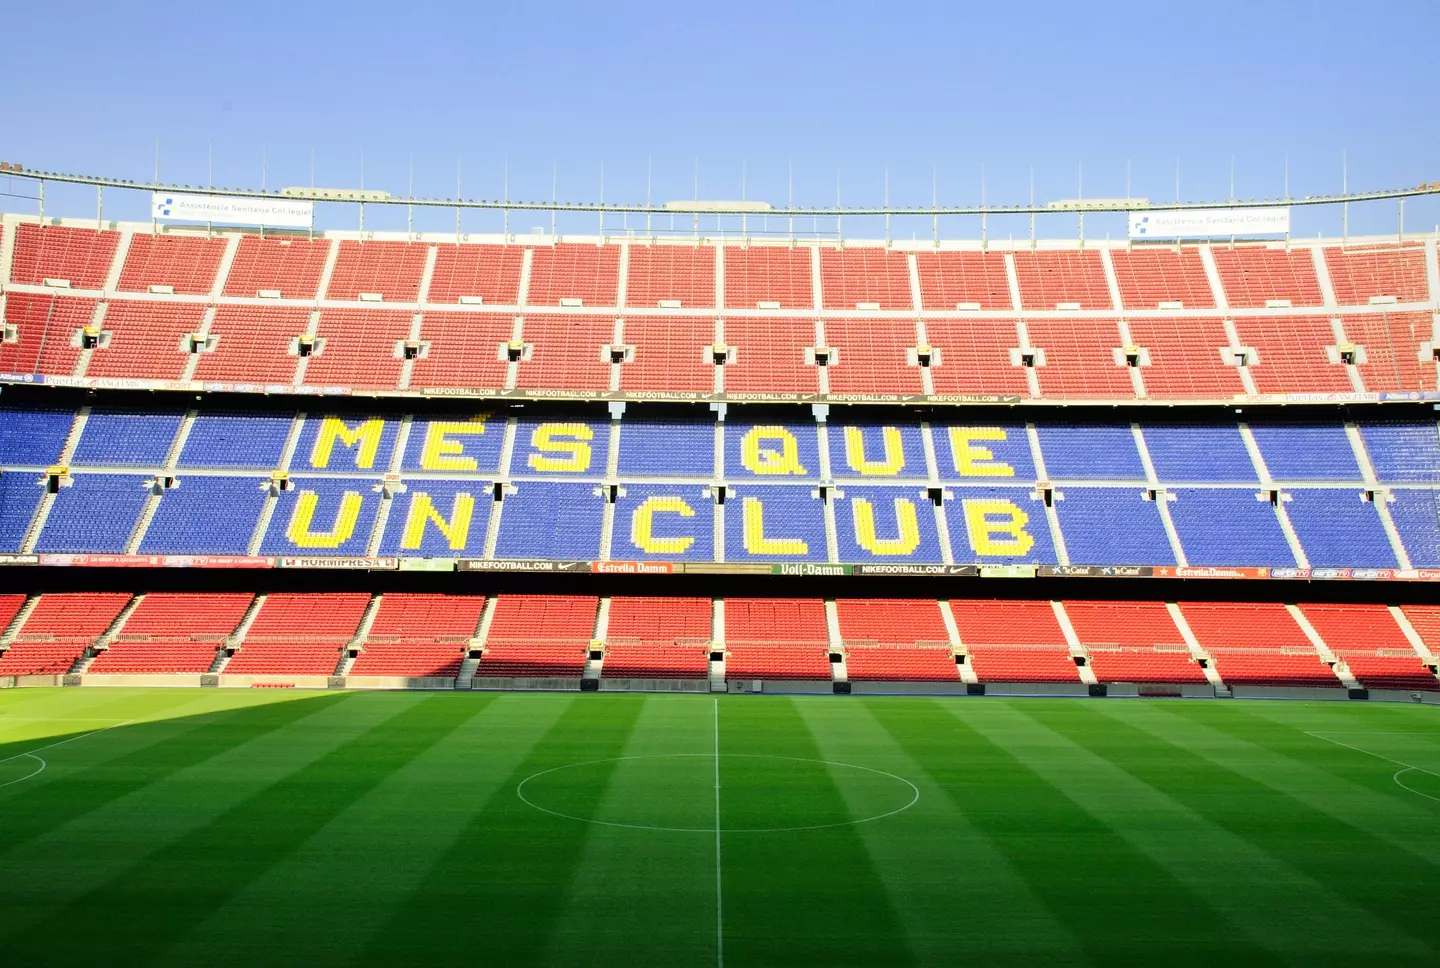 Barcelona are in talks to sell the naming rights to their iconic stadium (Image: Alamy)